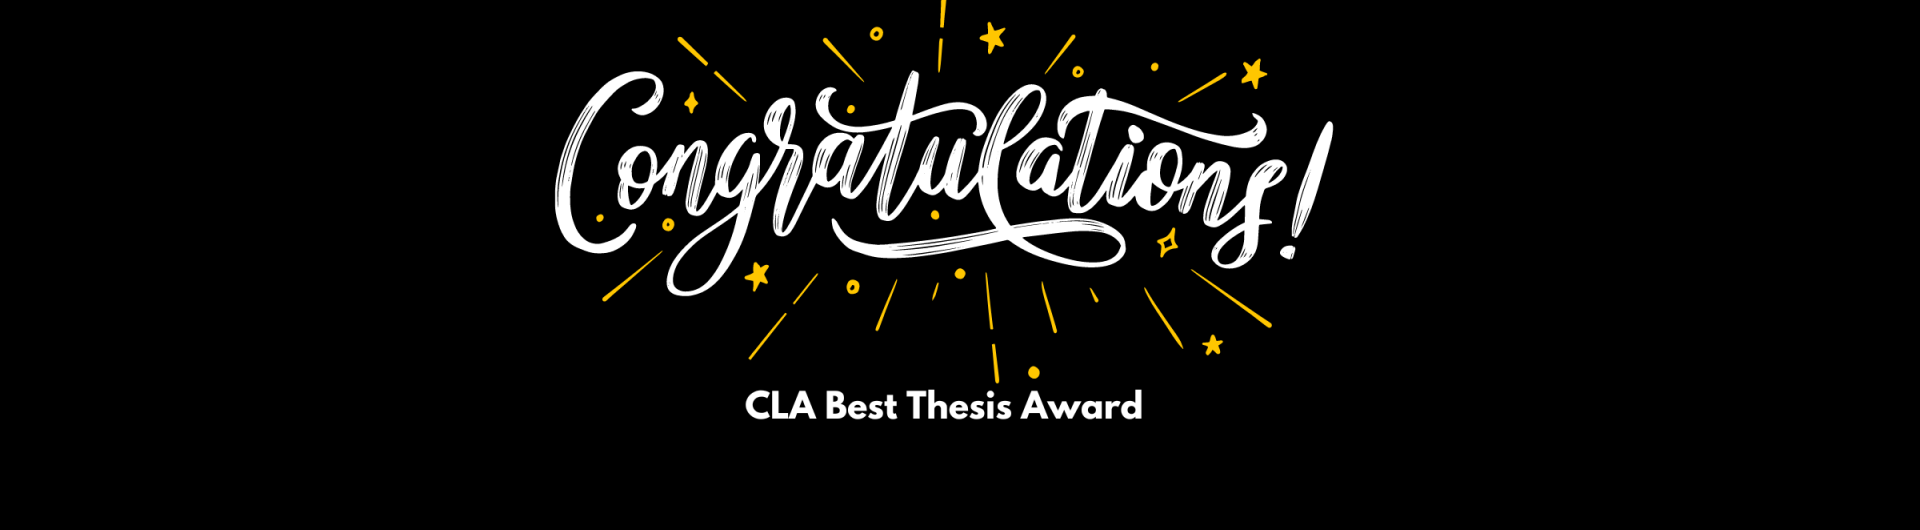 CLA Best Thesis Award - Banner